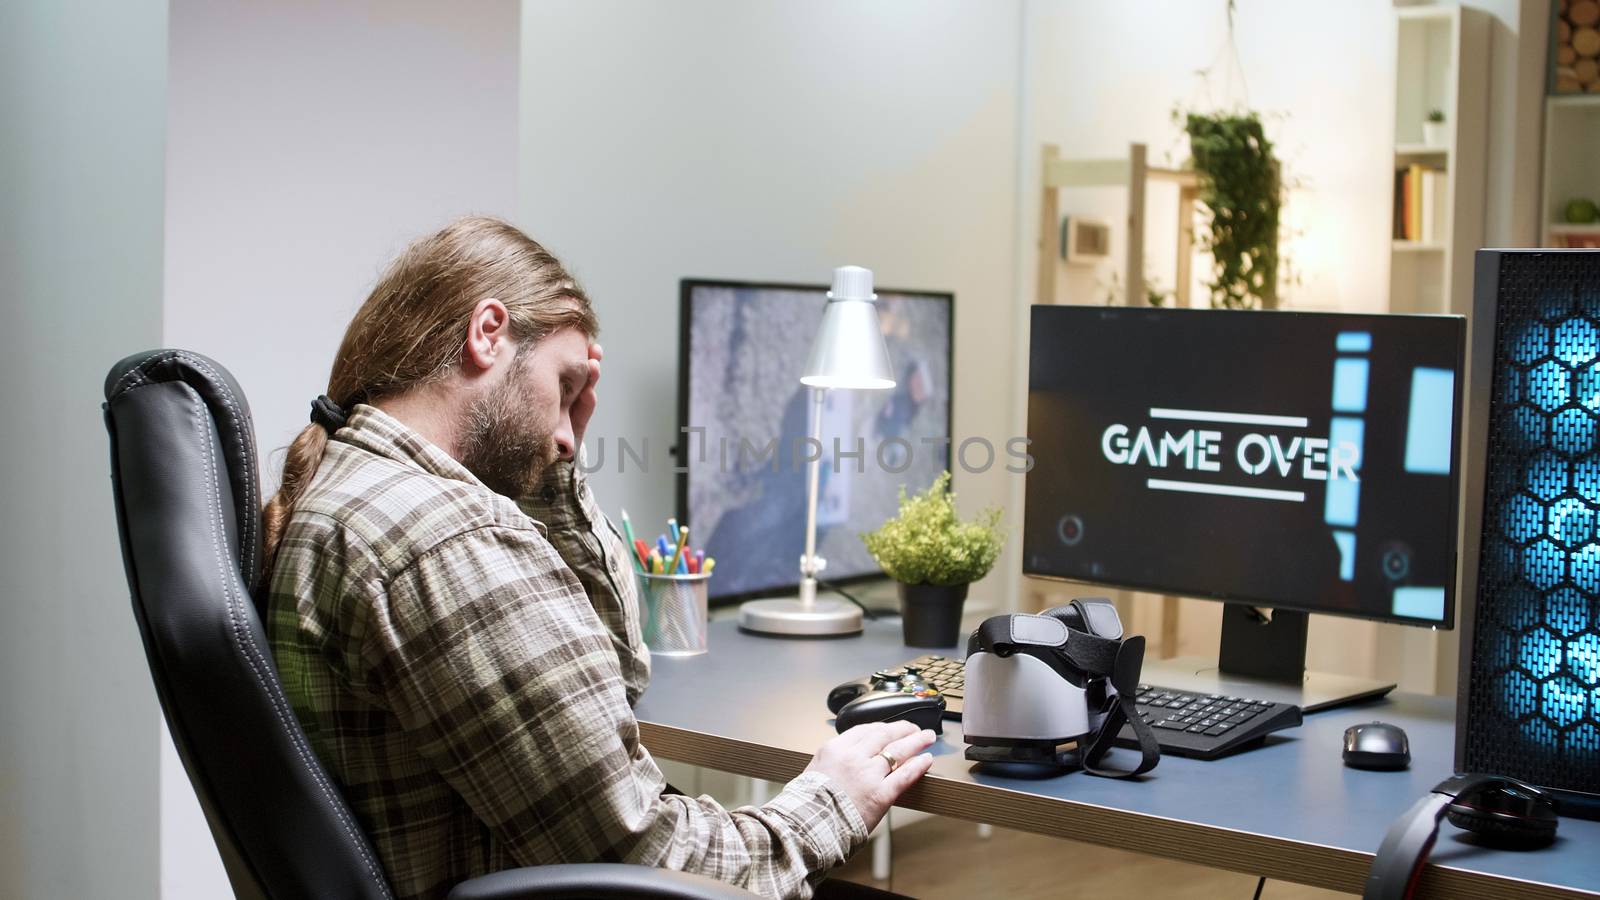 Game over for man sitting on gaming chair using vr headset. Modern technology for gaming.